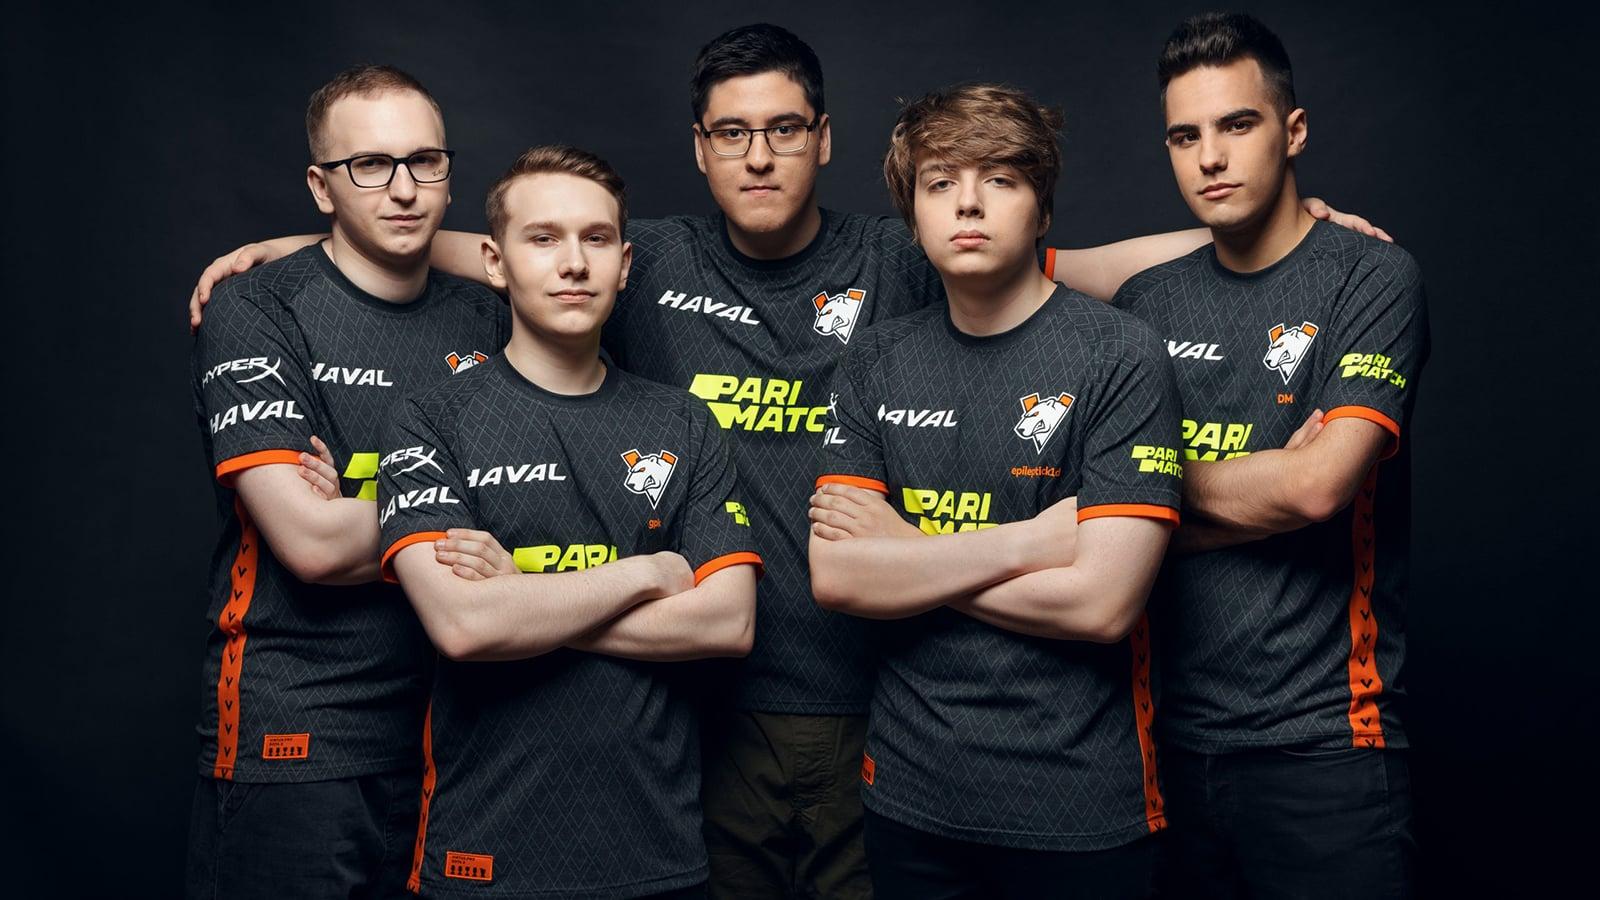 Virtus.pro players modelling their latest jersey